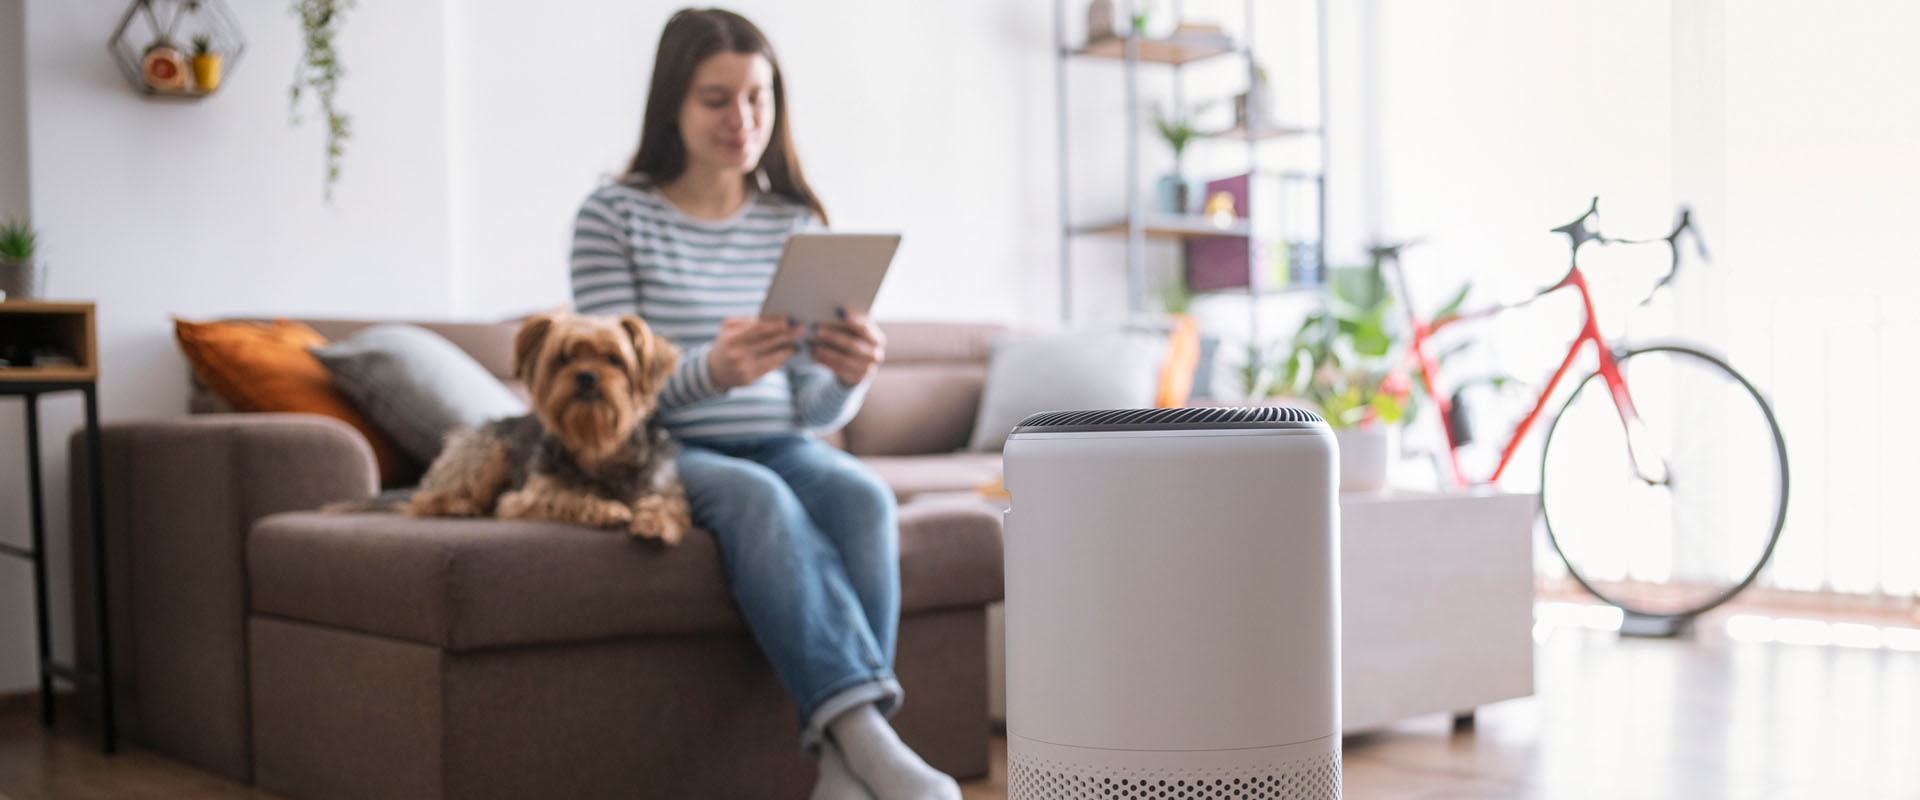 Where Should You Place an Air Purifier for Optimal Performance?